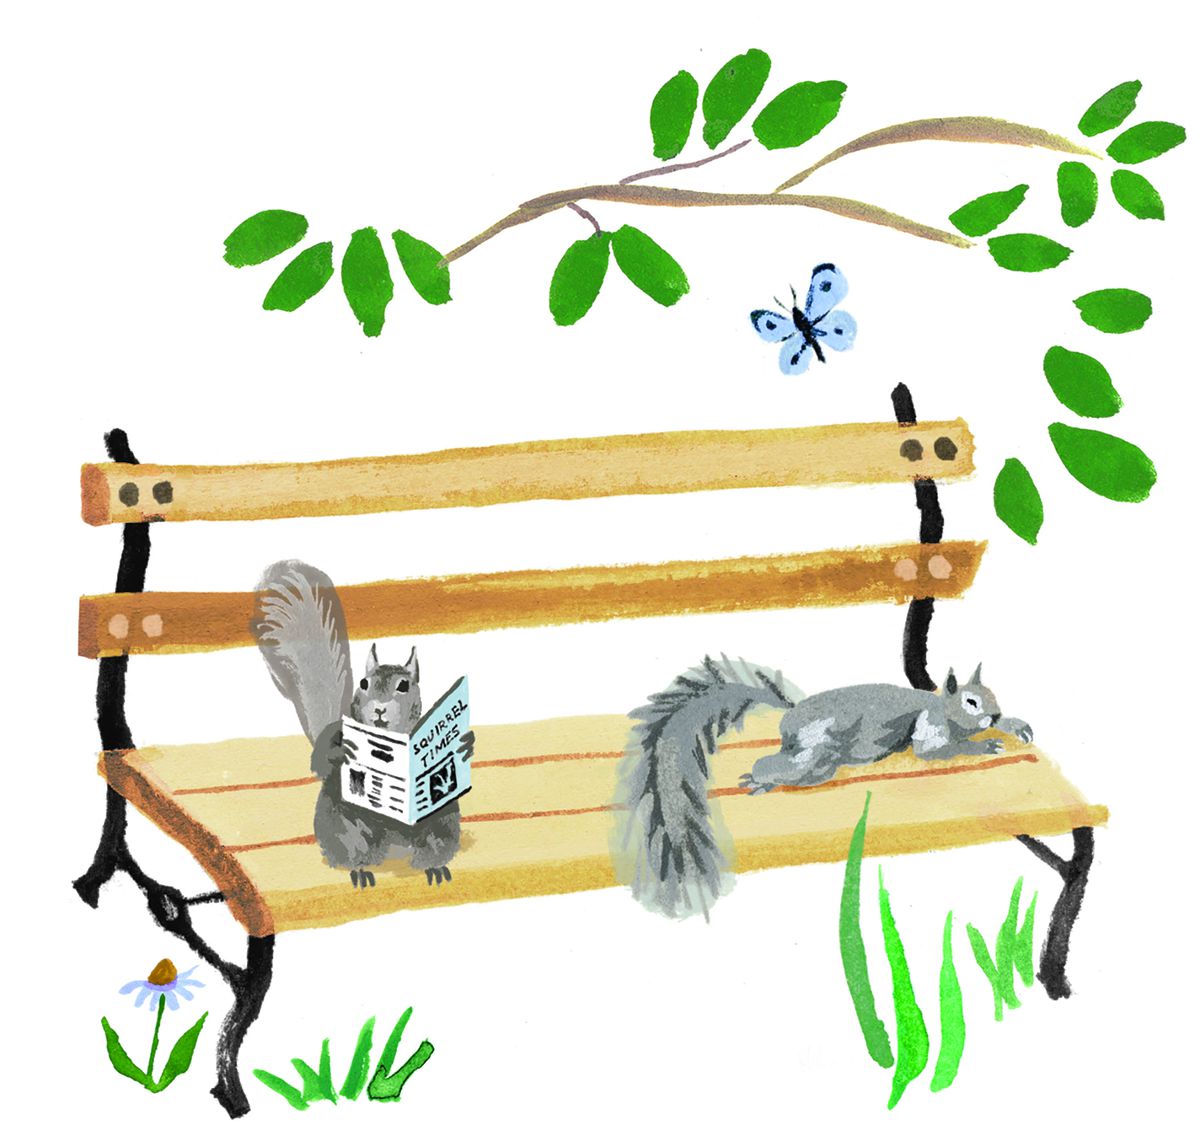 An illustration of two squirrels rest on a wooden park bench surrounded by greenery and a blue butterfly. One squirrel reads a tiny newspaper.